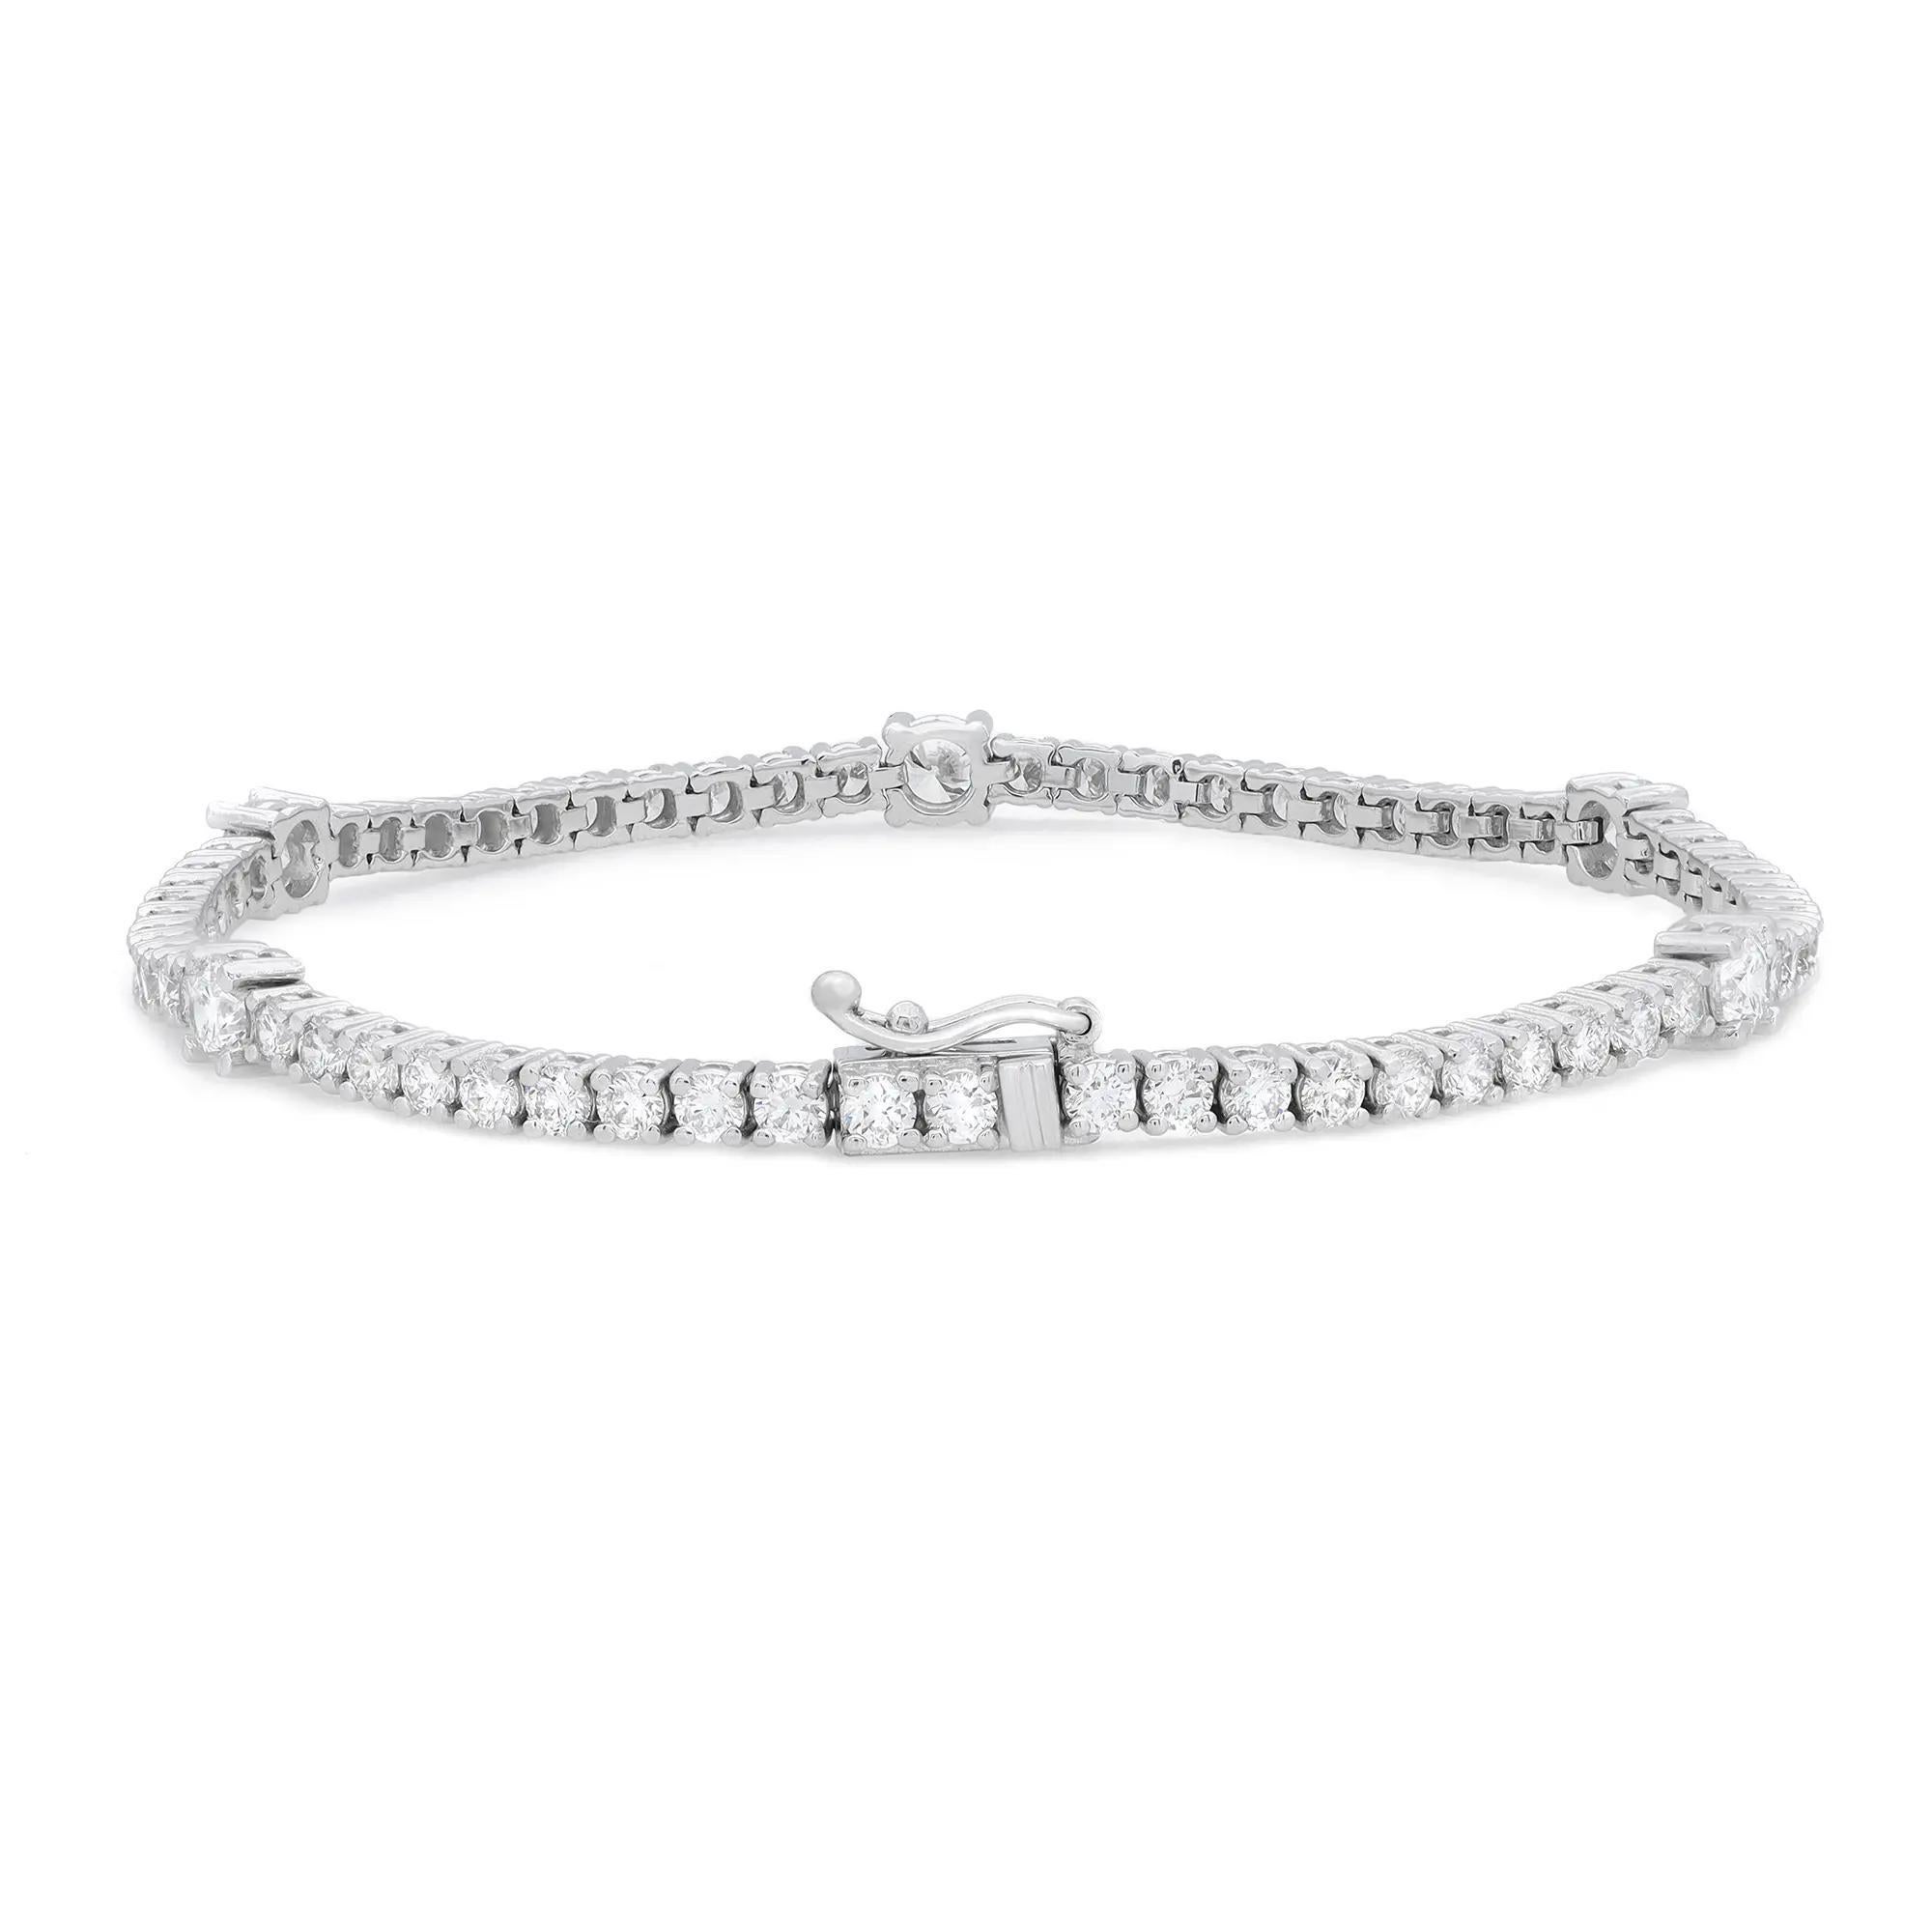 Classic yet elegant, this breathtaking tennis bracelet is crafted in 14K white gold with 66 prong set dazzling round brilliant cut diamonds. Total diamond weight: 4.12 carats with 5 diamonds size 20pt and the rest 4pt each. The bright white diamonds